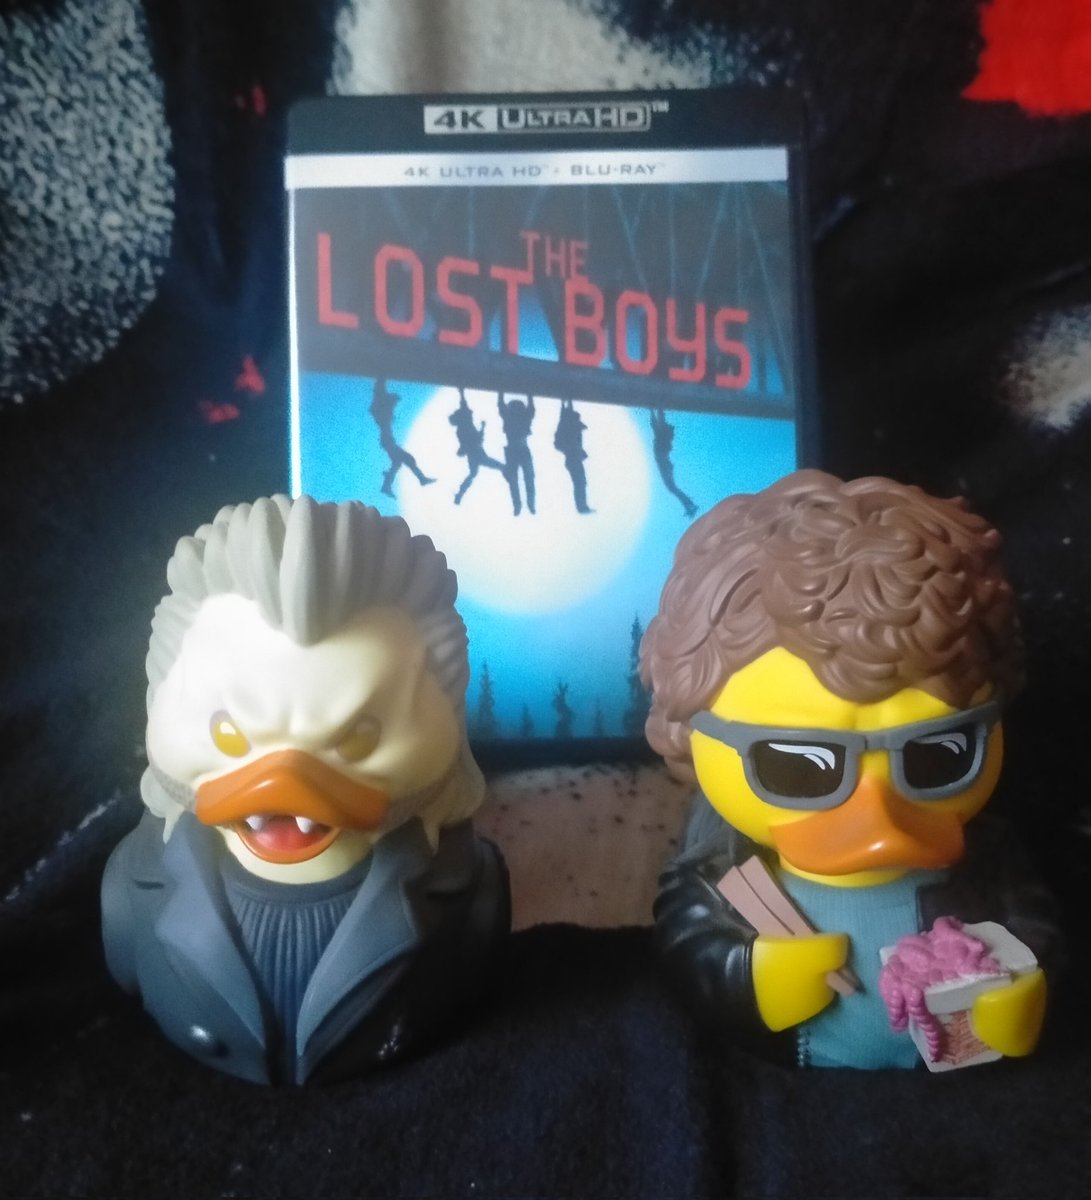 This evening's movie...

🧛🎷 #TheLostBoys 🧛🎷